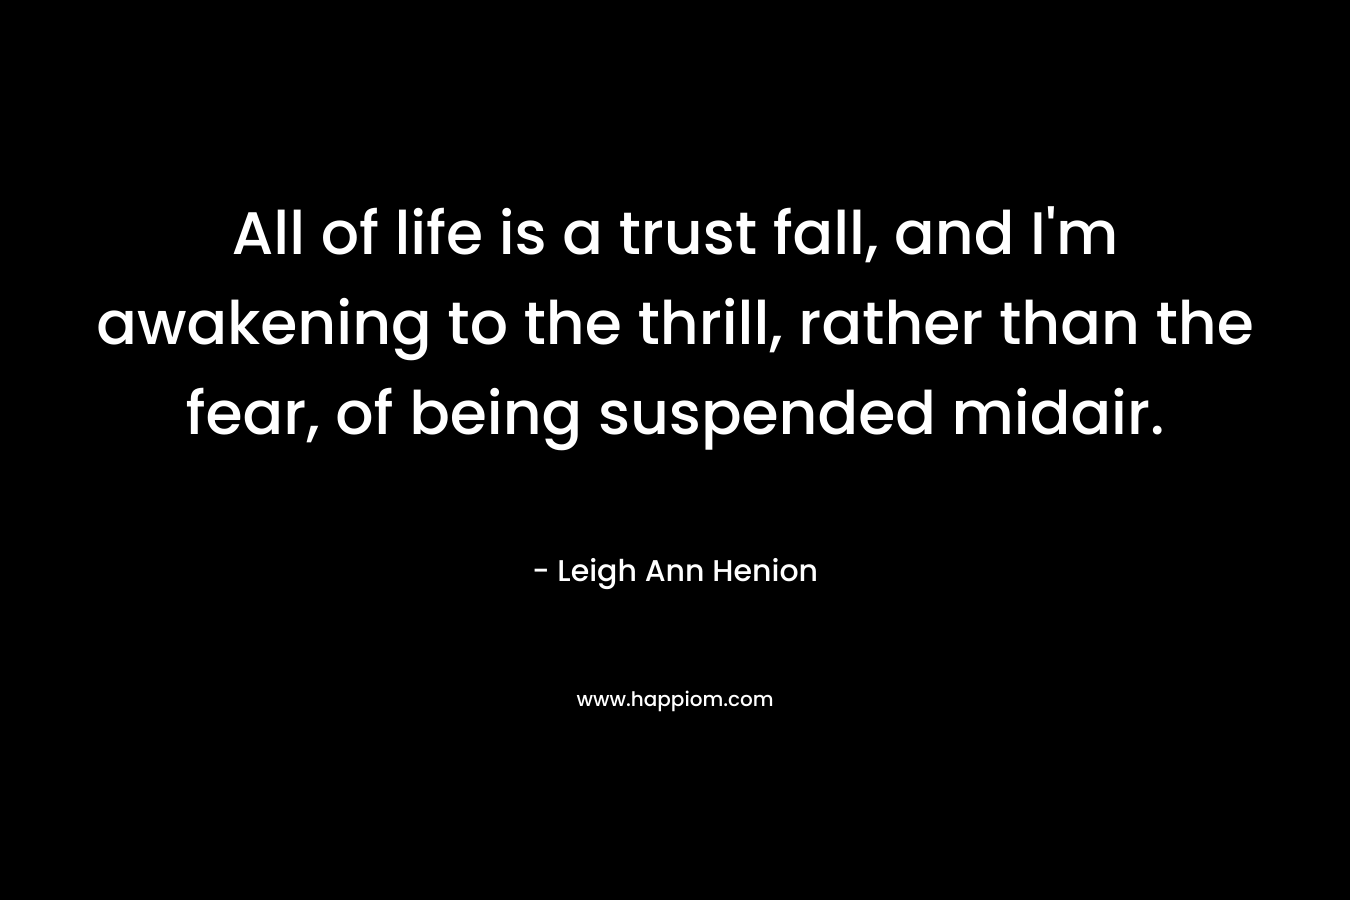 All of life is a trust fall, and I’m awakening to the thrill, rather than the fear, of being suspended midair. – Leigh Ann Henion